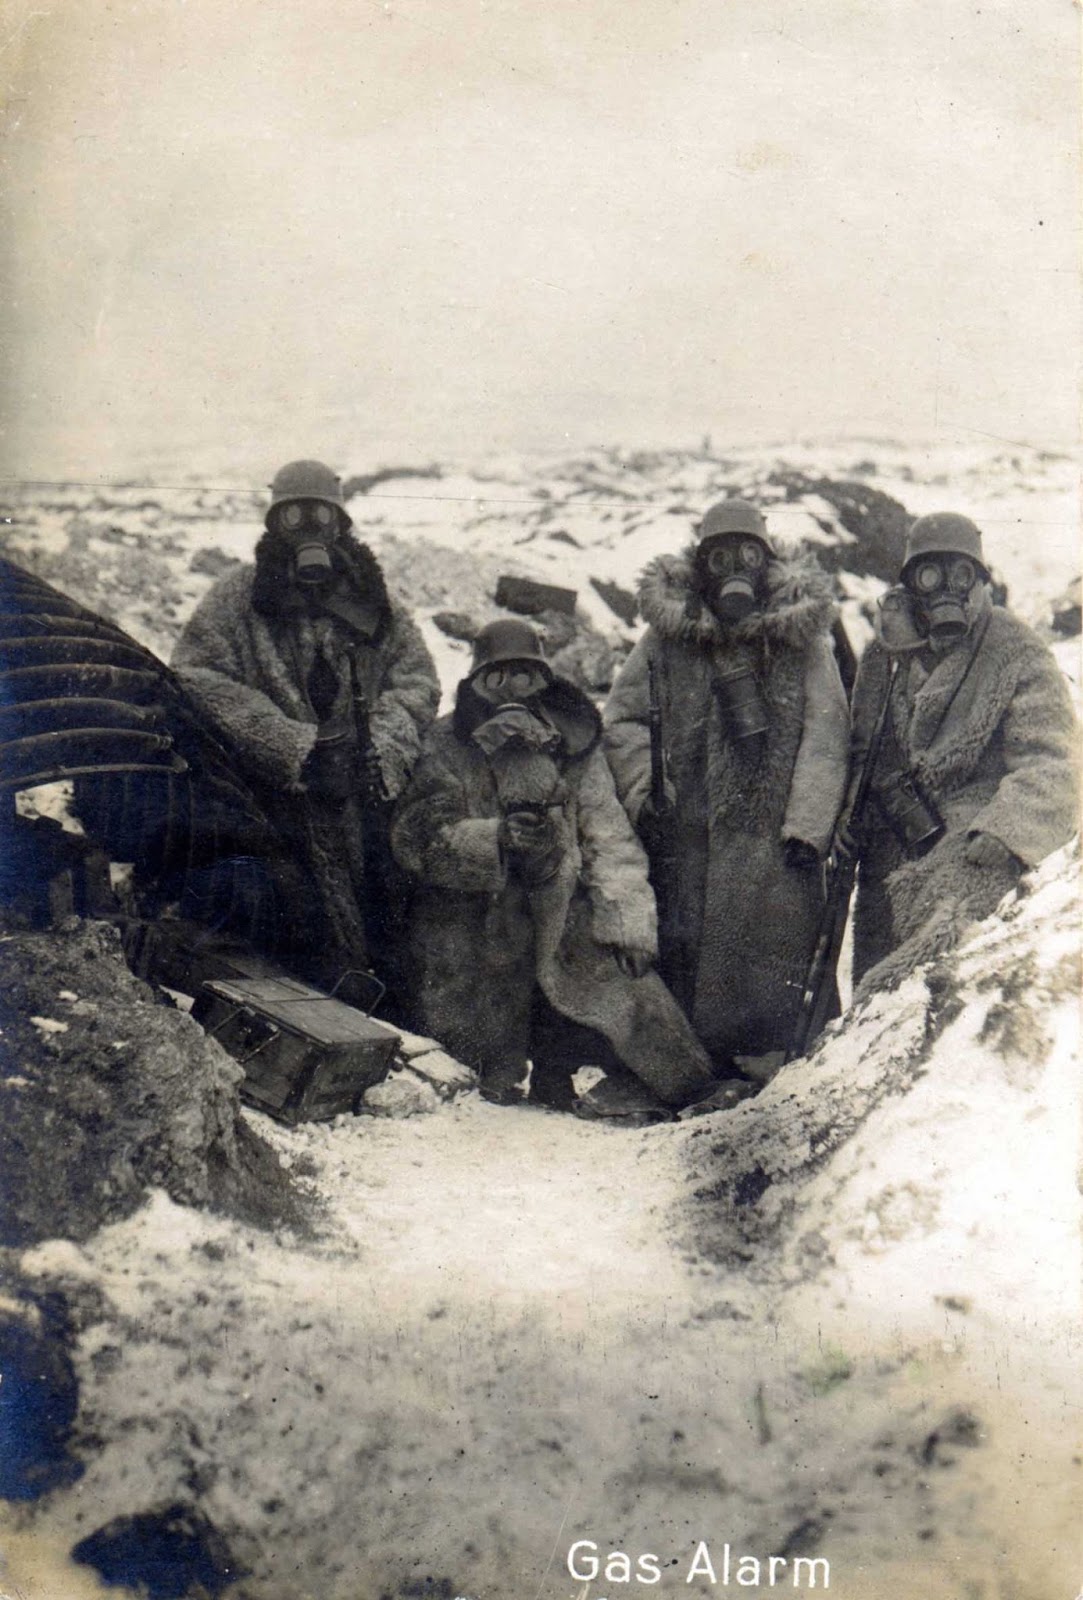 Four-German-soldiers-wearing-fur-coats-and-gas-masks-in-a-trench-1917.jpg